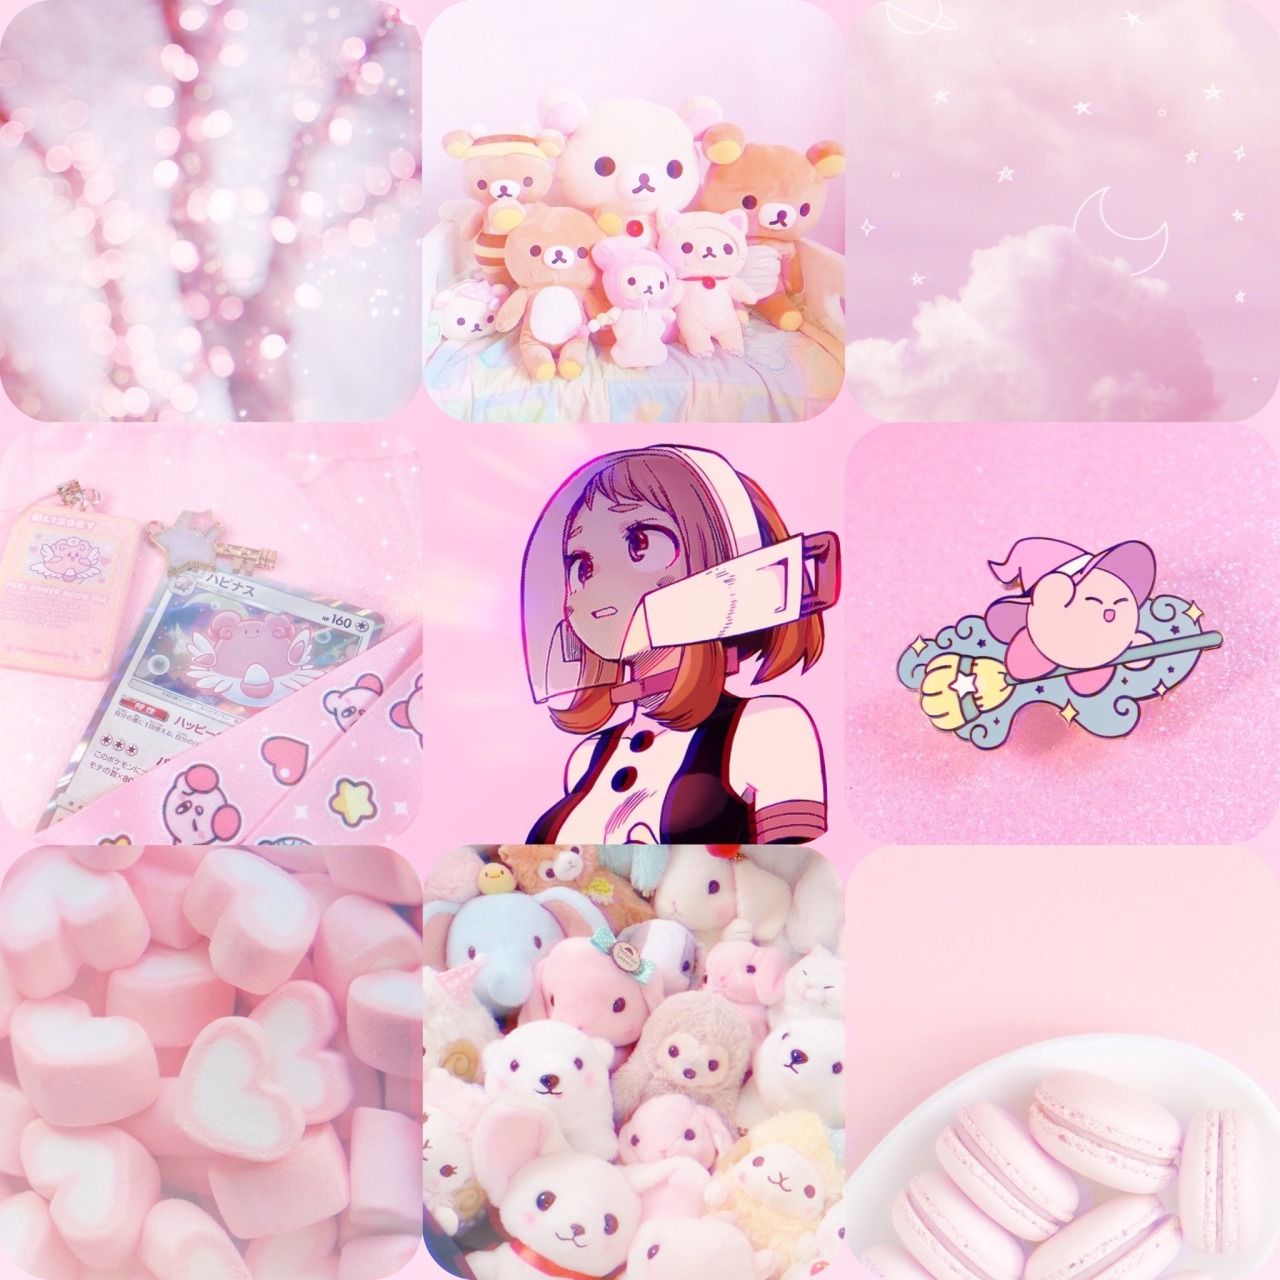 Aesthetic wallpaper pink background girl with pink hair and pink background with cute illustrations of bears, macarons, and a girl with pink hair - Kirby